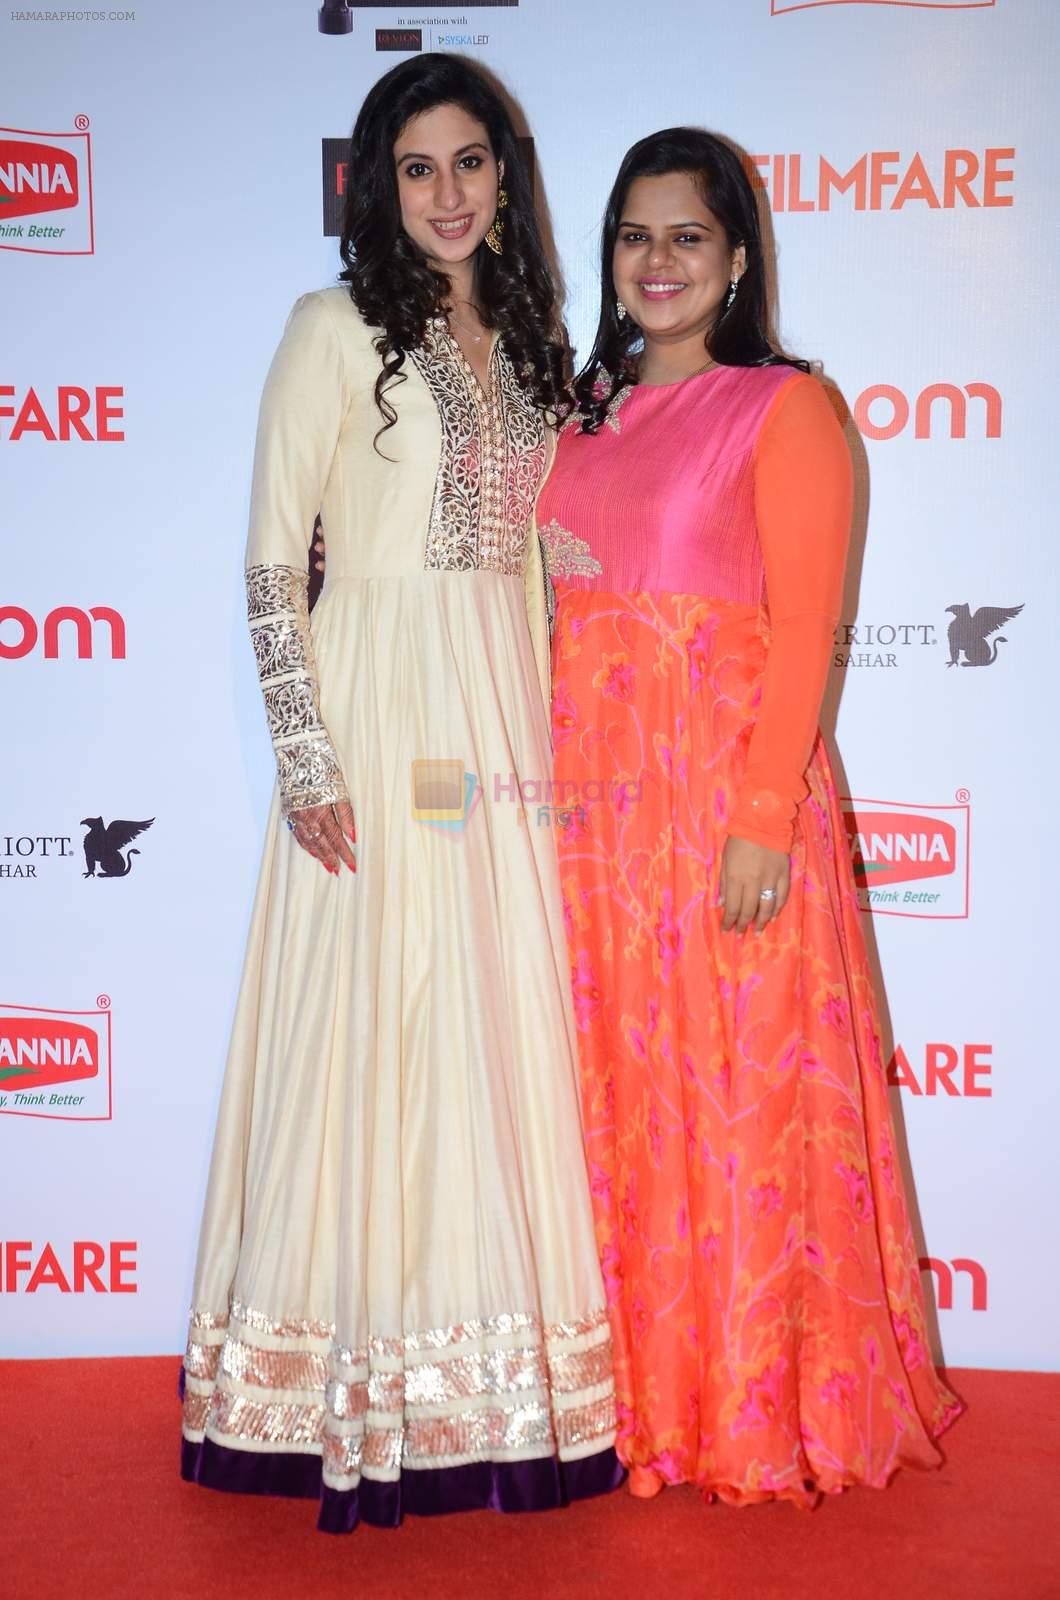 at Filmfare Nominations red carpet on 9th Jan 2016